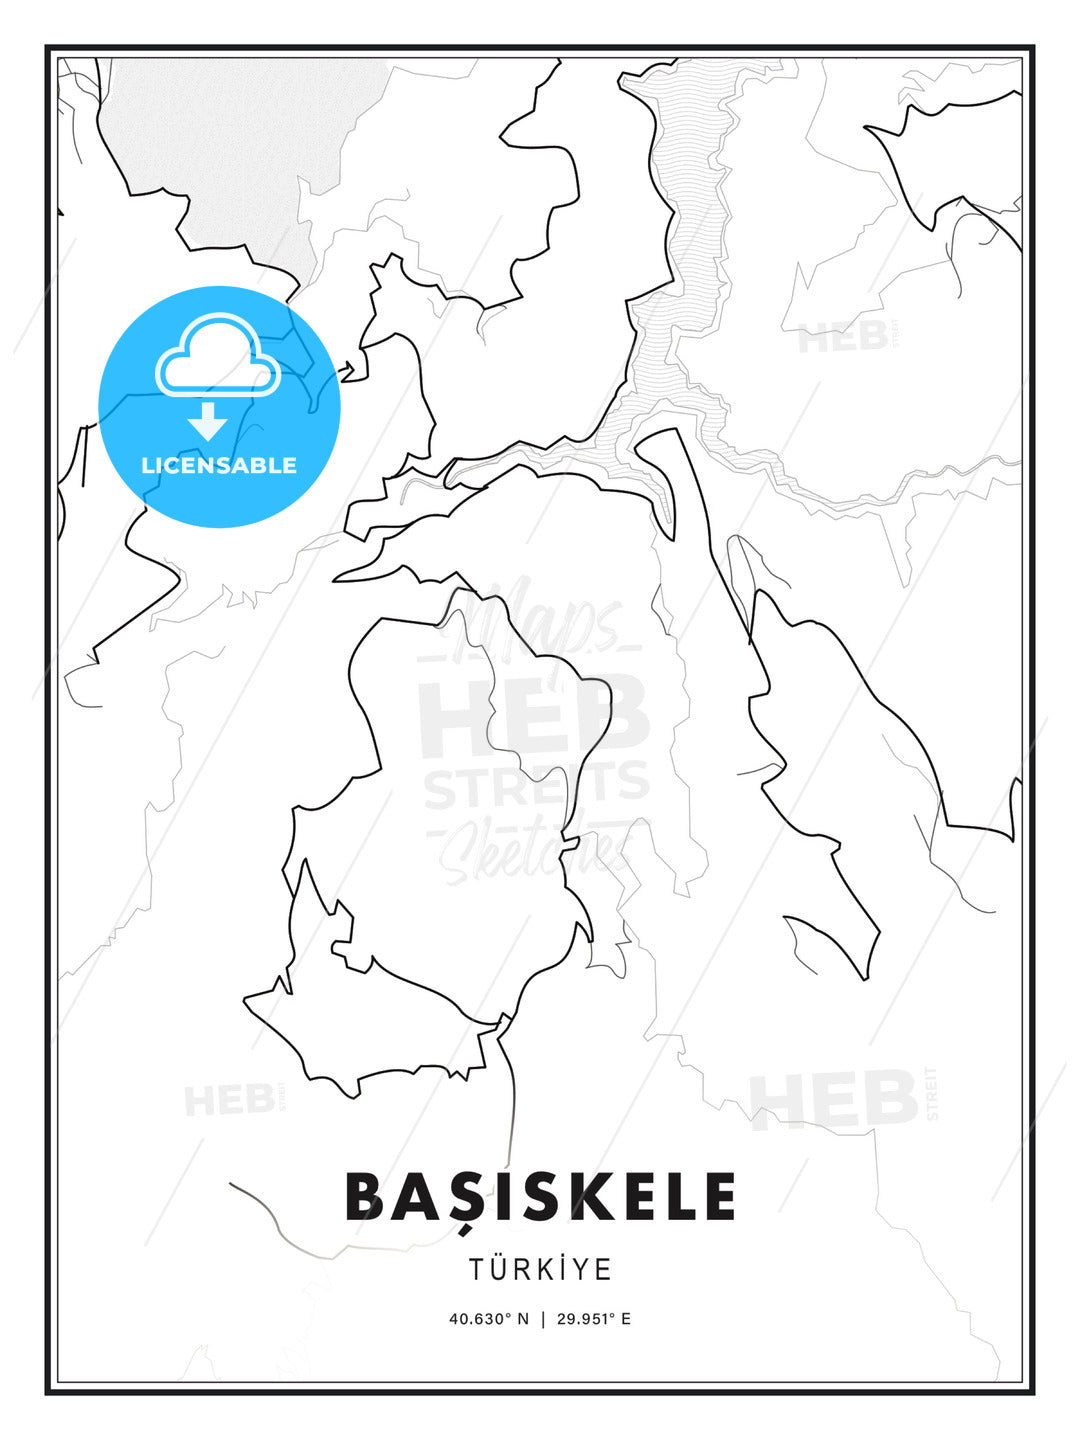 Başiskele, Turkey, Modern Print Template in Various Formats - HEBSTREITS Sketches